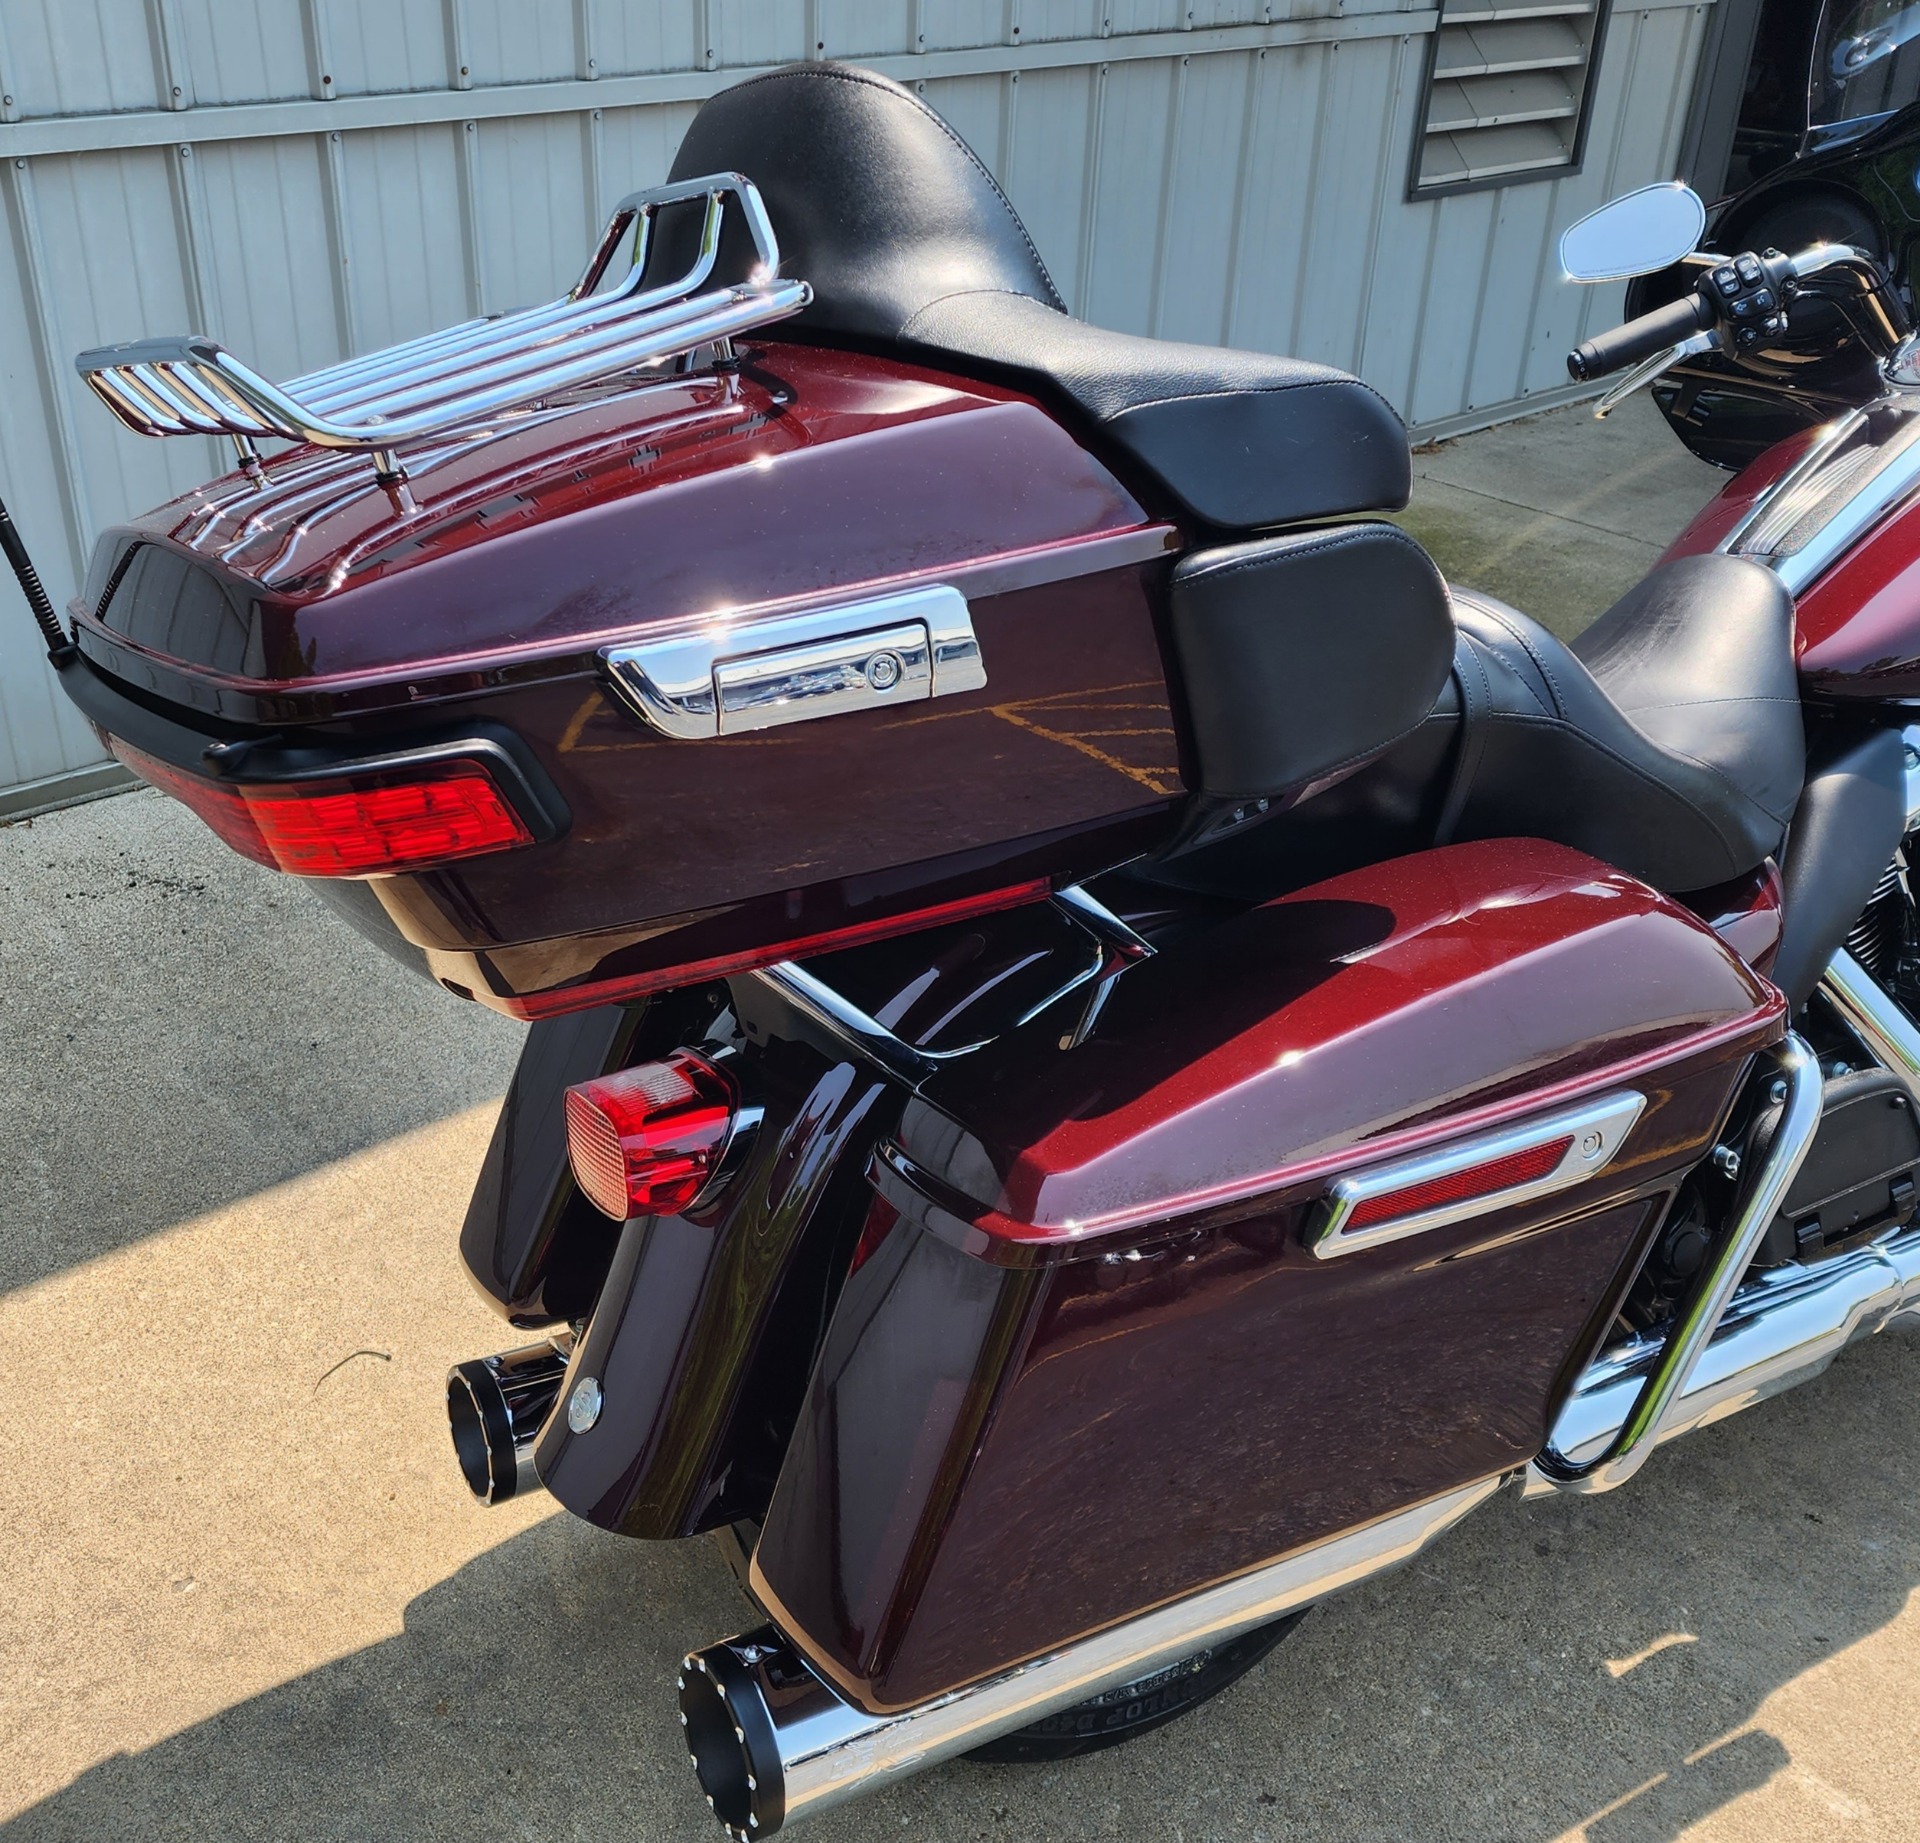 2021 Harley-Davidson Ultra Limited in Athens, Ohio - Photo 10